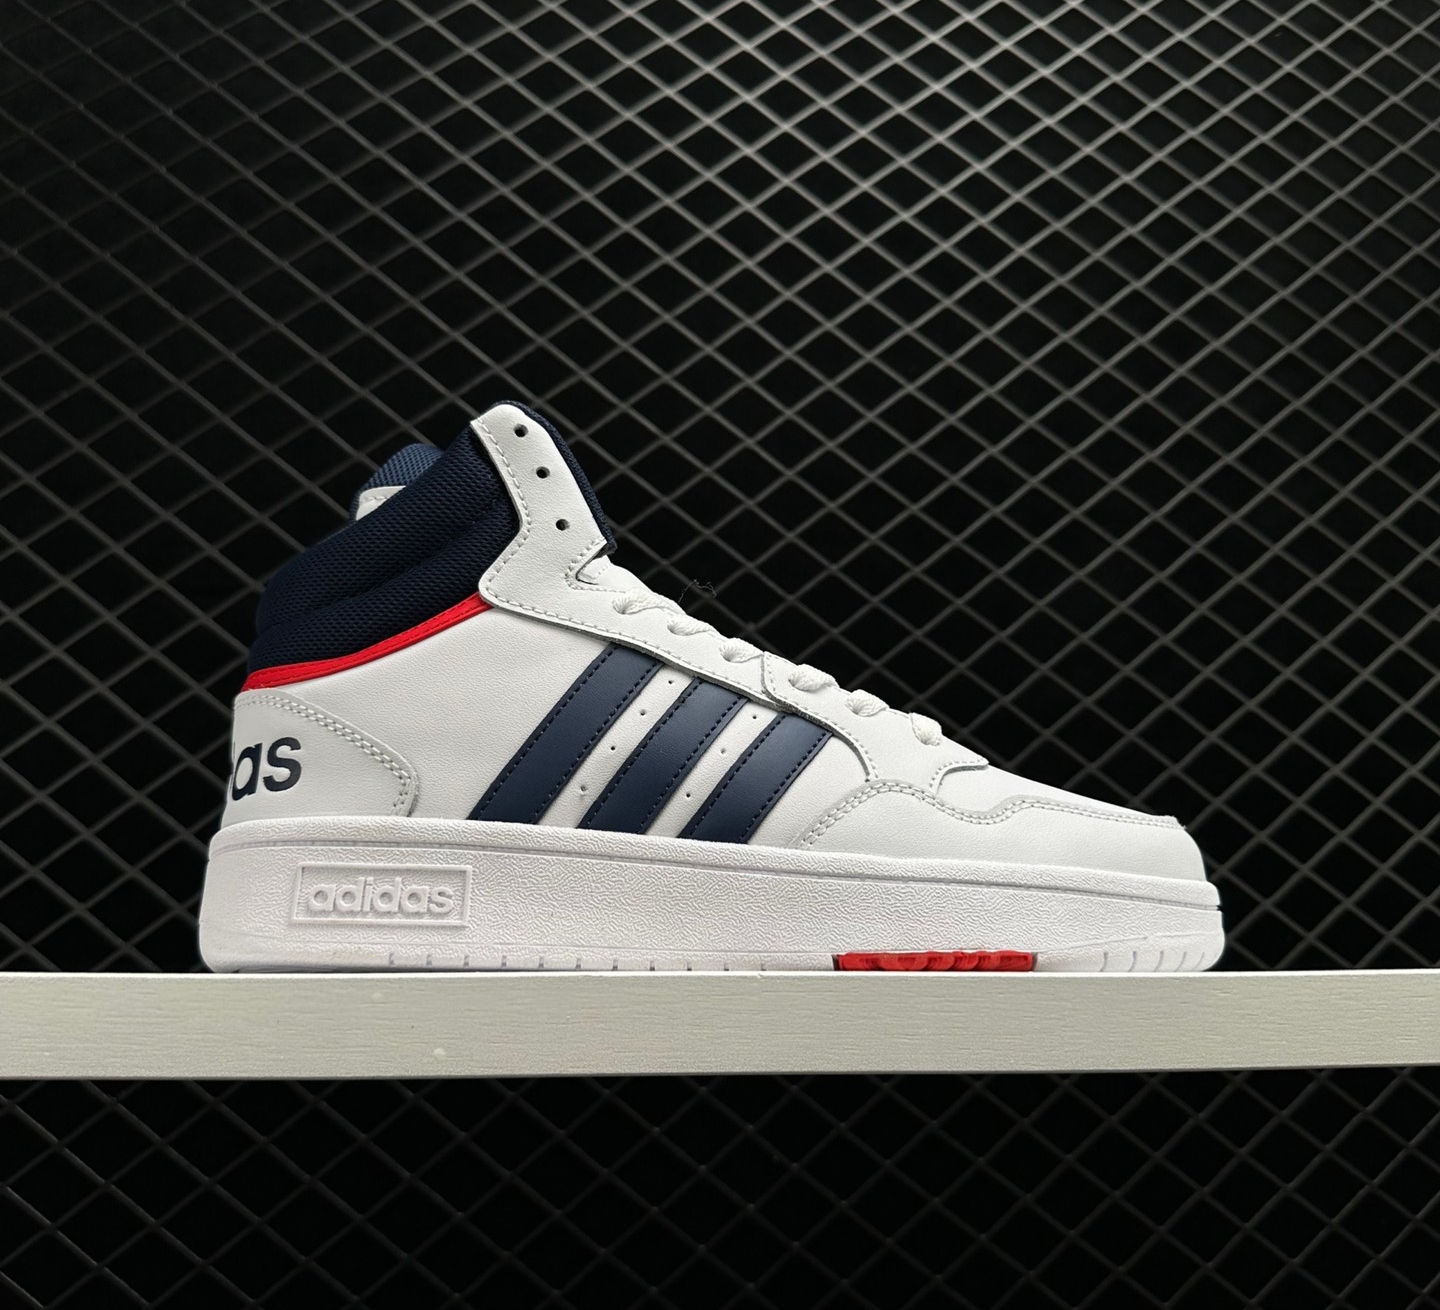 Adidas Hoops 3.0 White Navy Red GY5543 - Stylish and Sporty Sneakers